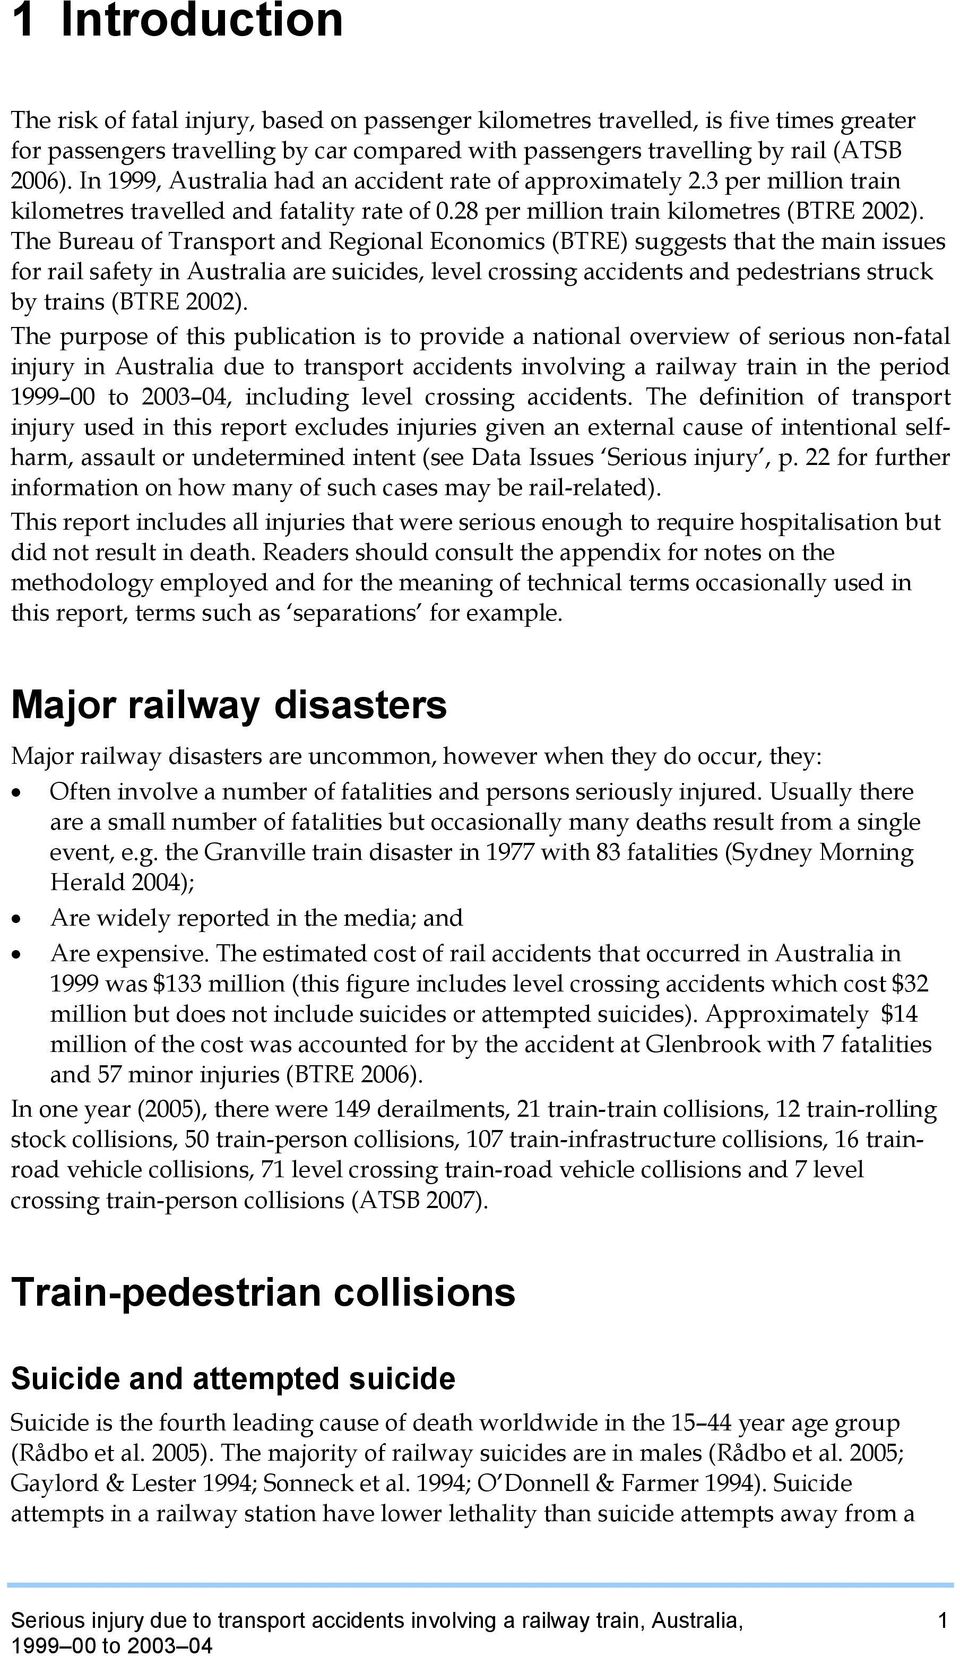 The Bureau of Transport and Regional Economics (BTRE) suggests that the main issues for rail safety in Australia are suicides, level crossing accidents and pedestrians struck by trains (BTRE 2002).